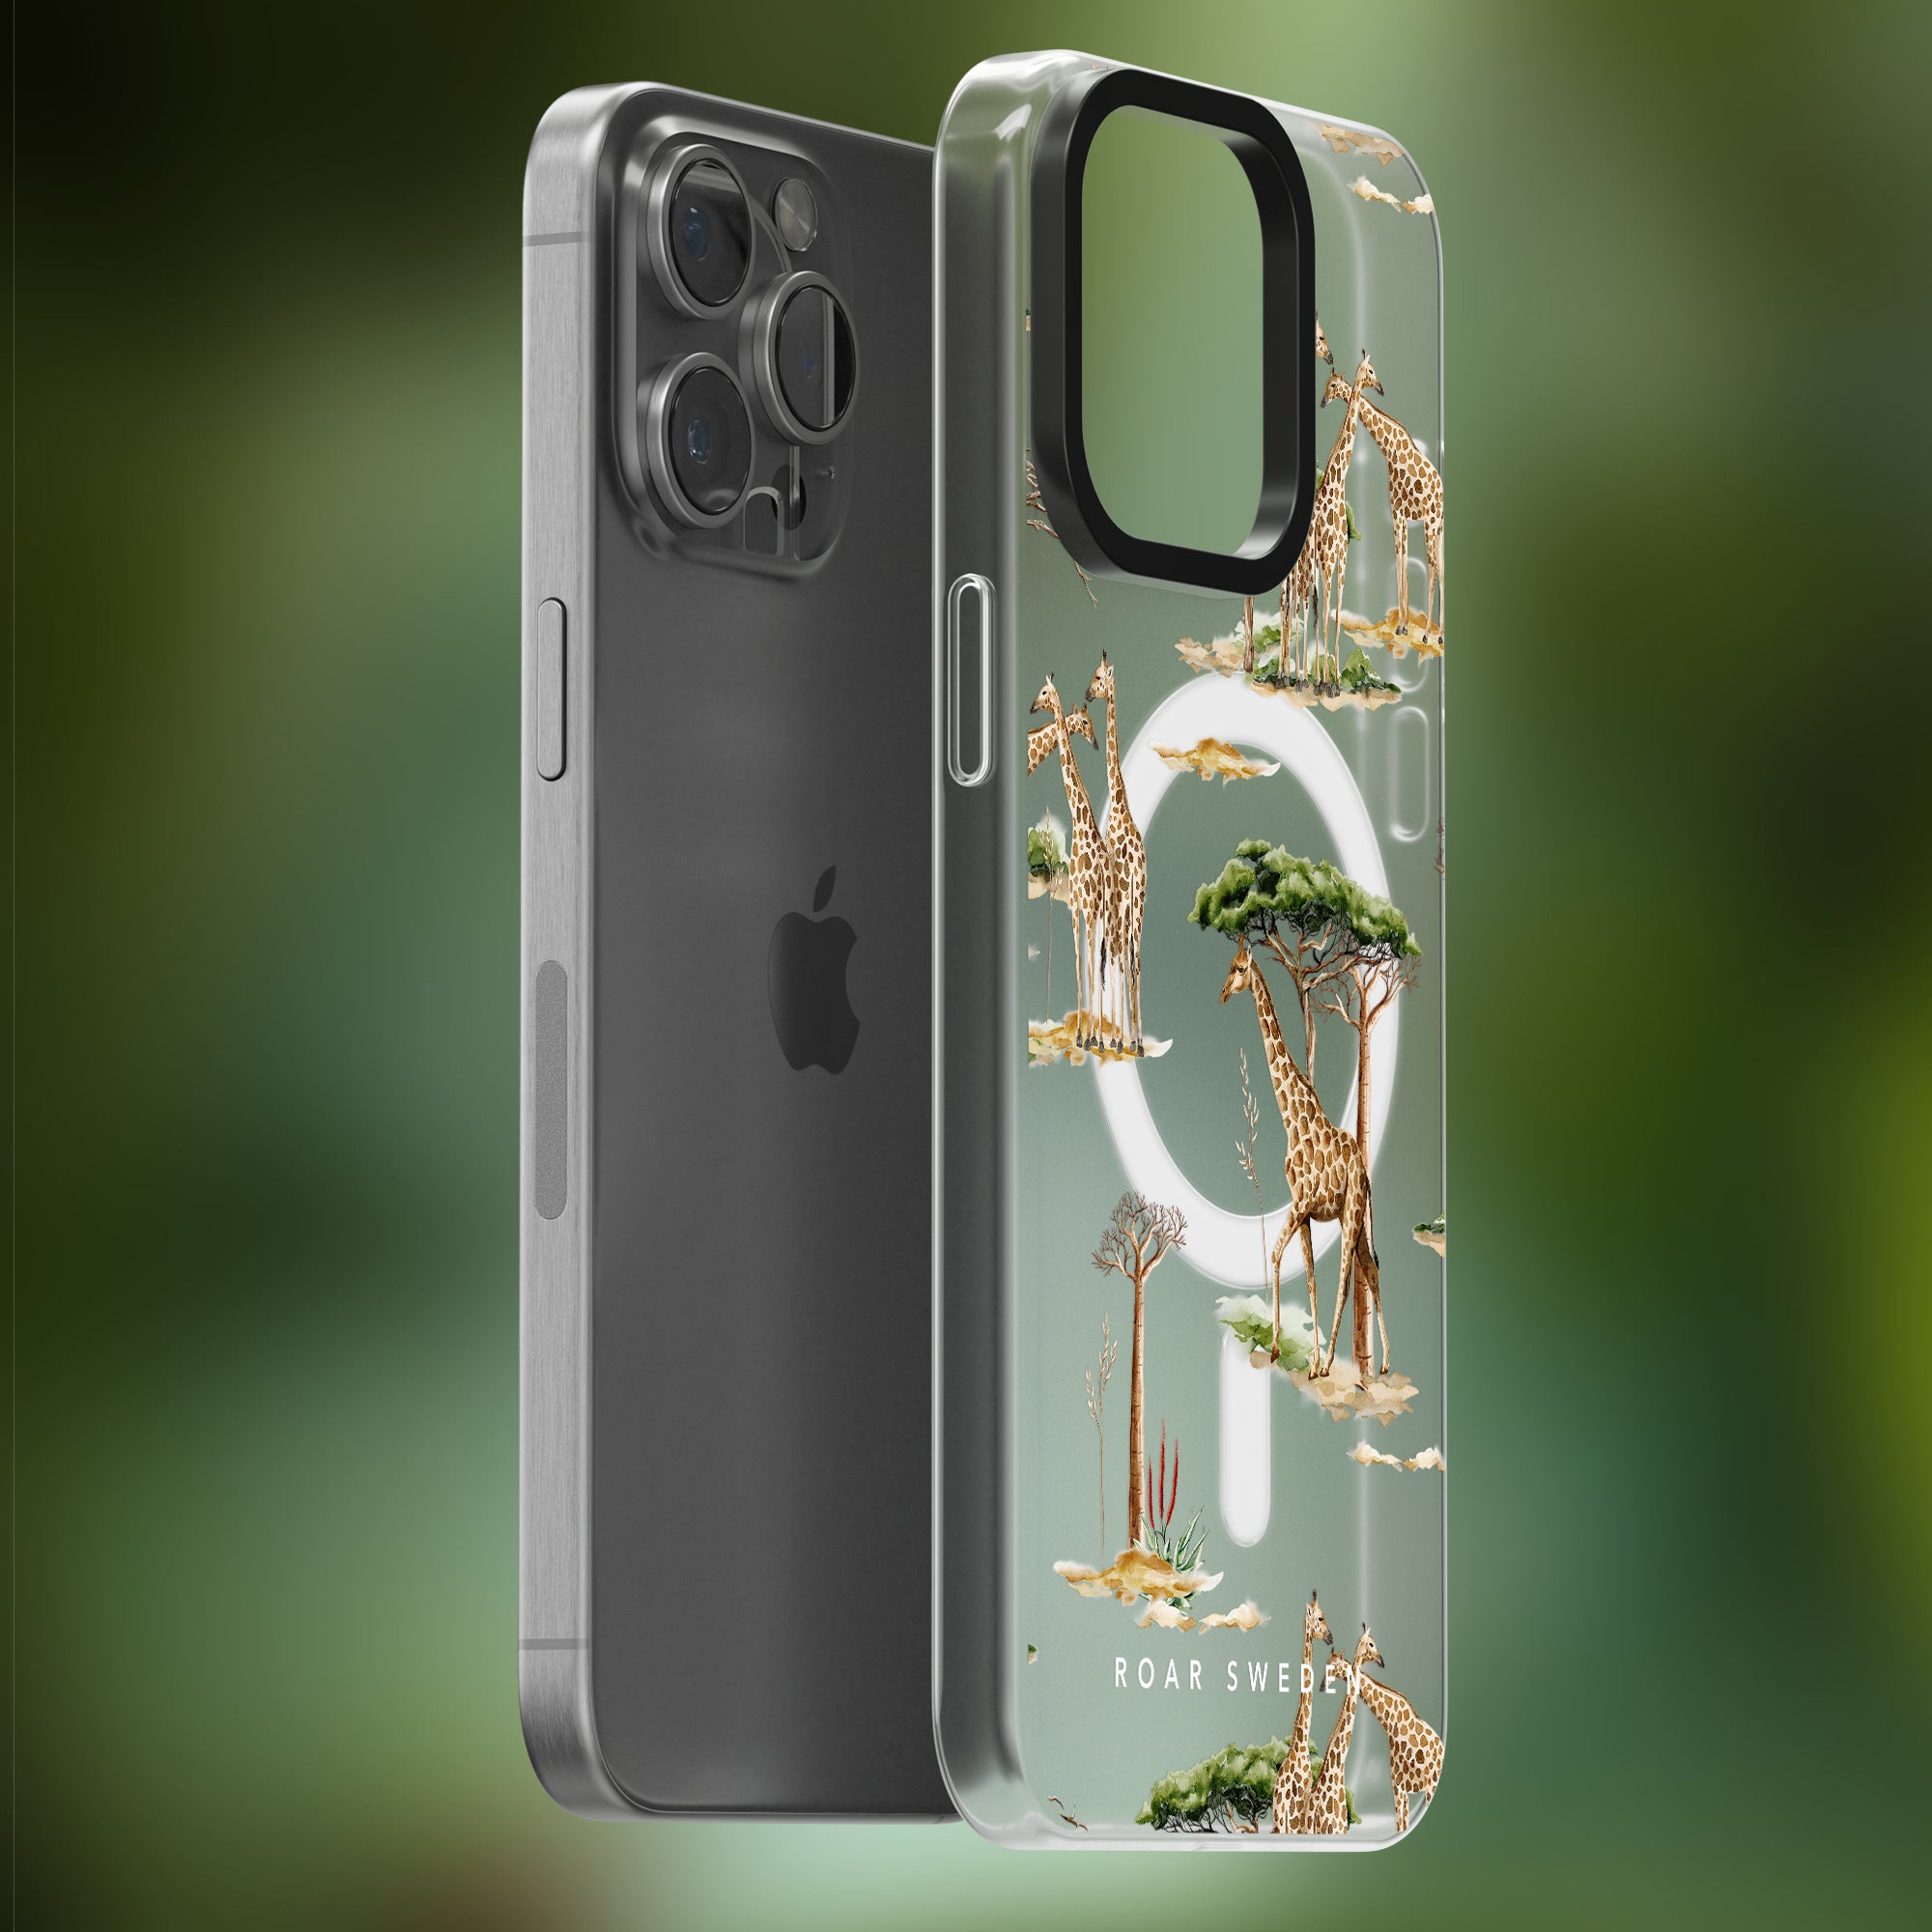 Grey iPhone with a "Giraffa - MagSafe" Case from the Safari Collection, featuring giraffes and trees on a transparent background, with "ROAR SWEDEN" text at the bottom, seamlessly incorporating MagSafe-teknologi.